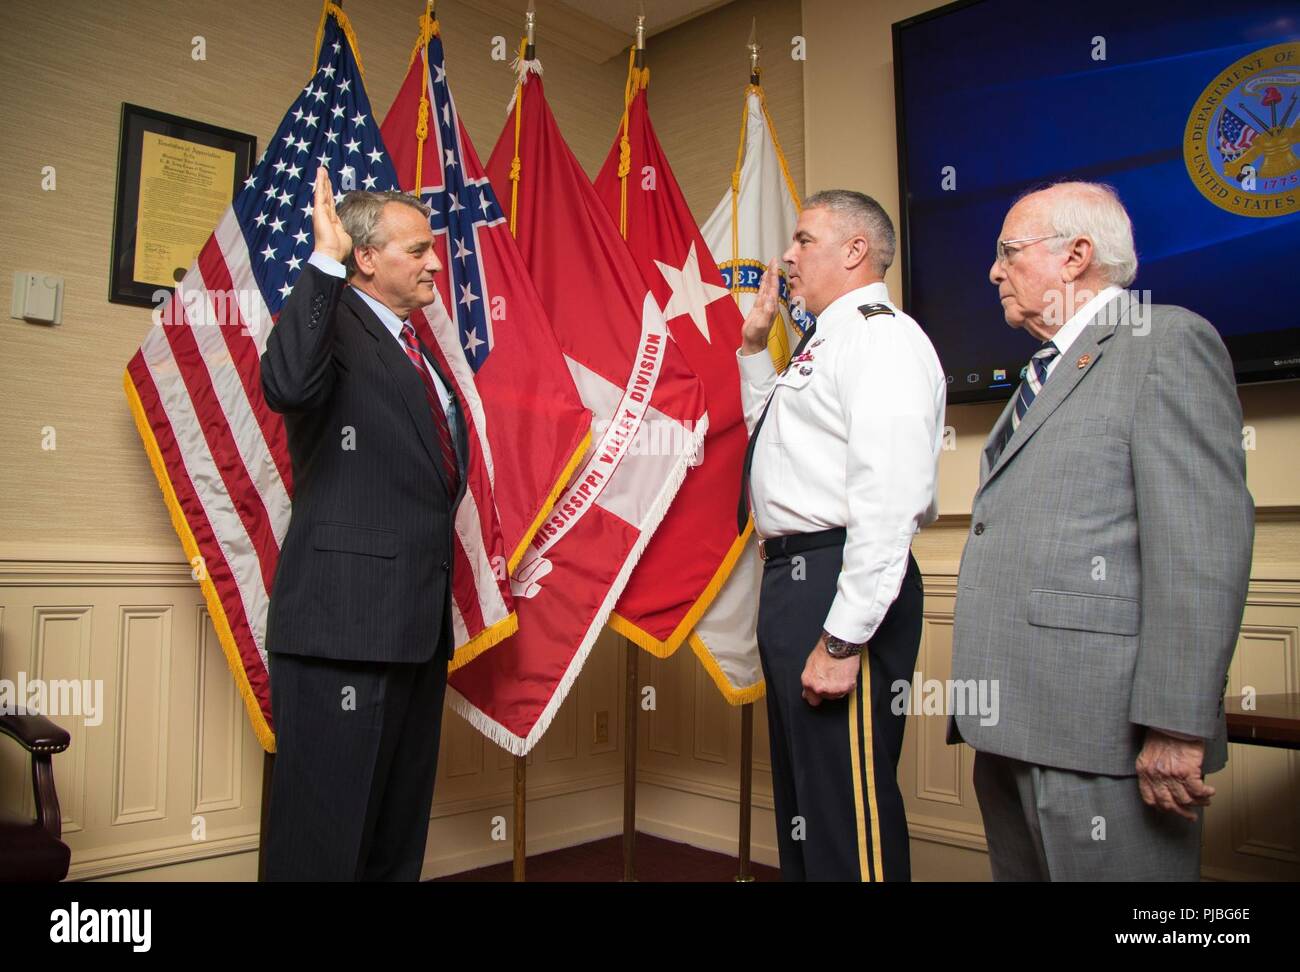 Mississippi River Commission President Maj. Gen. Richard Kaiser administers the oath of office to James A. Reeder at the MRC headquarters in Vicksburg, Miss., July 11, 2018. President Donald Trump appointed Reeder as a member of the Mississippi River Commission May 17, 2018. Commission appointments are nominated by the President of the United States and vetted by the U.S. Senate. (USACE Stock Photo